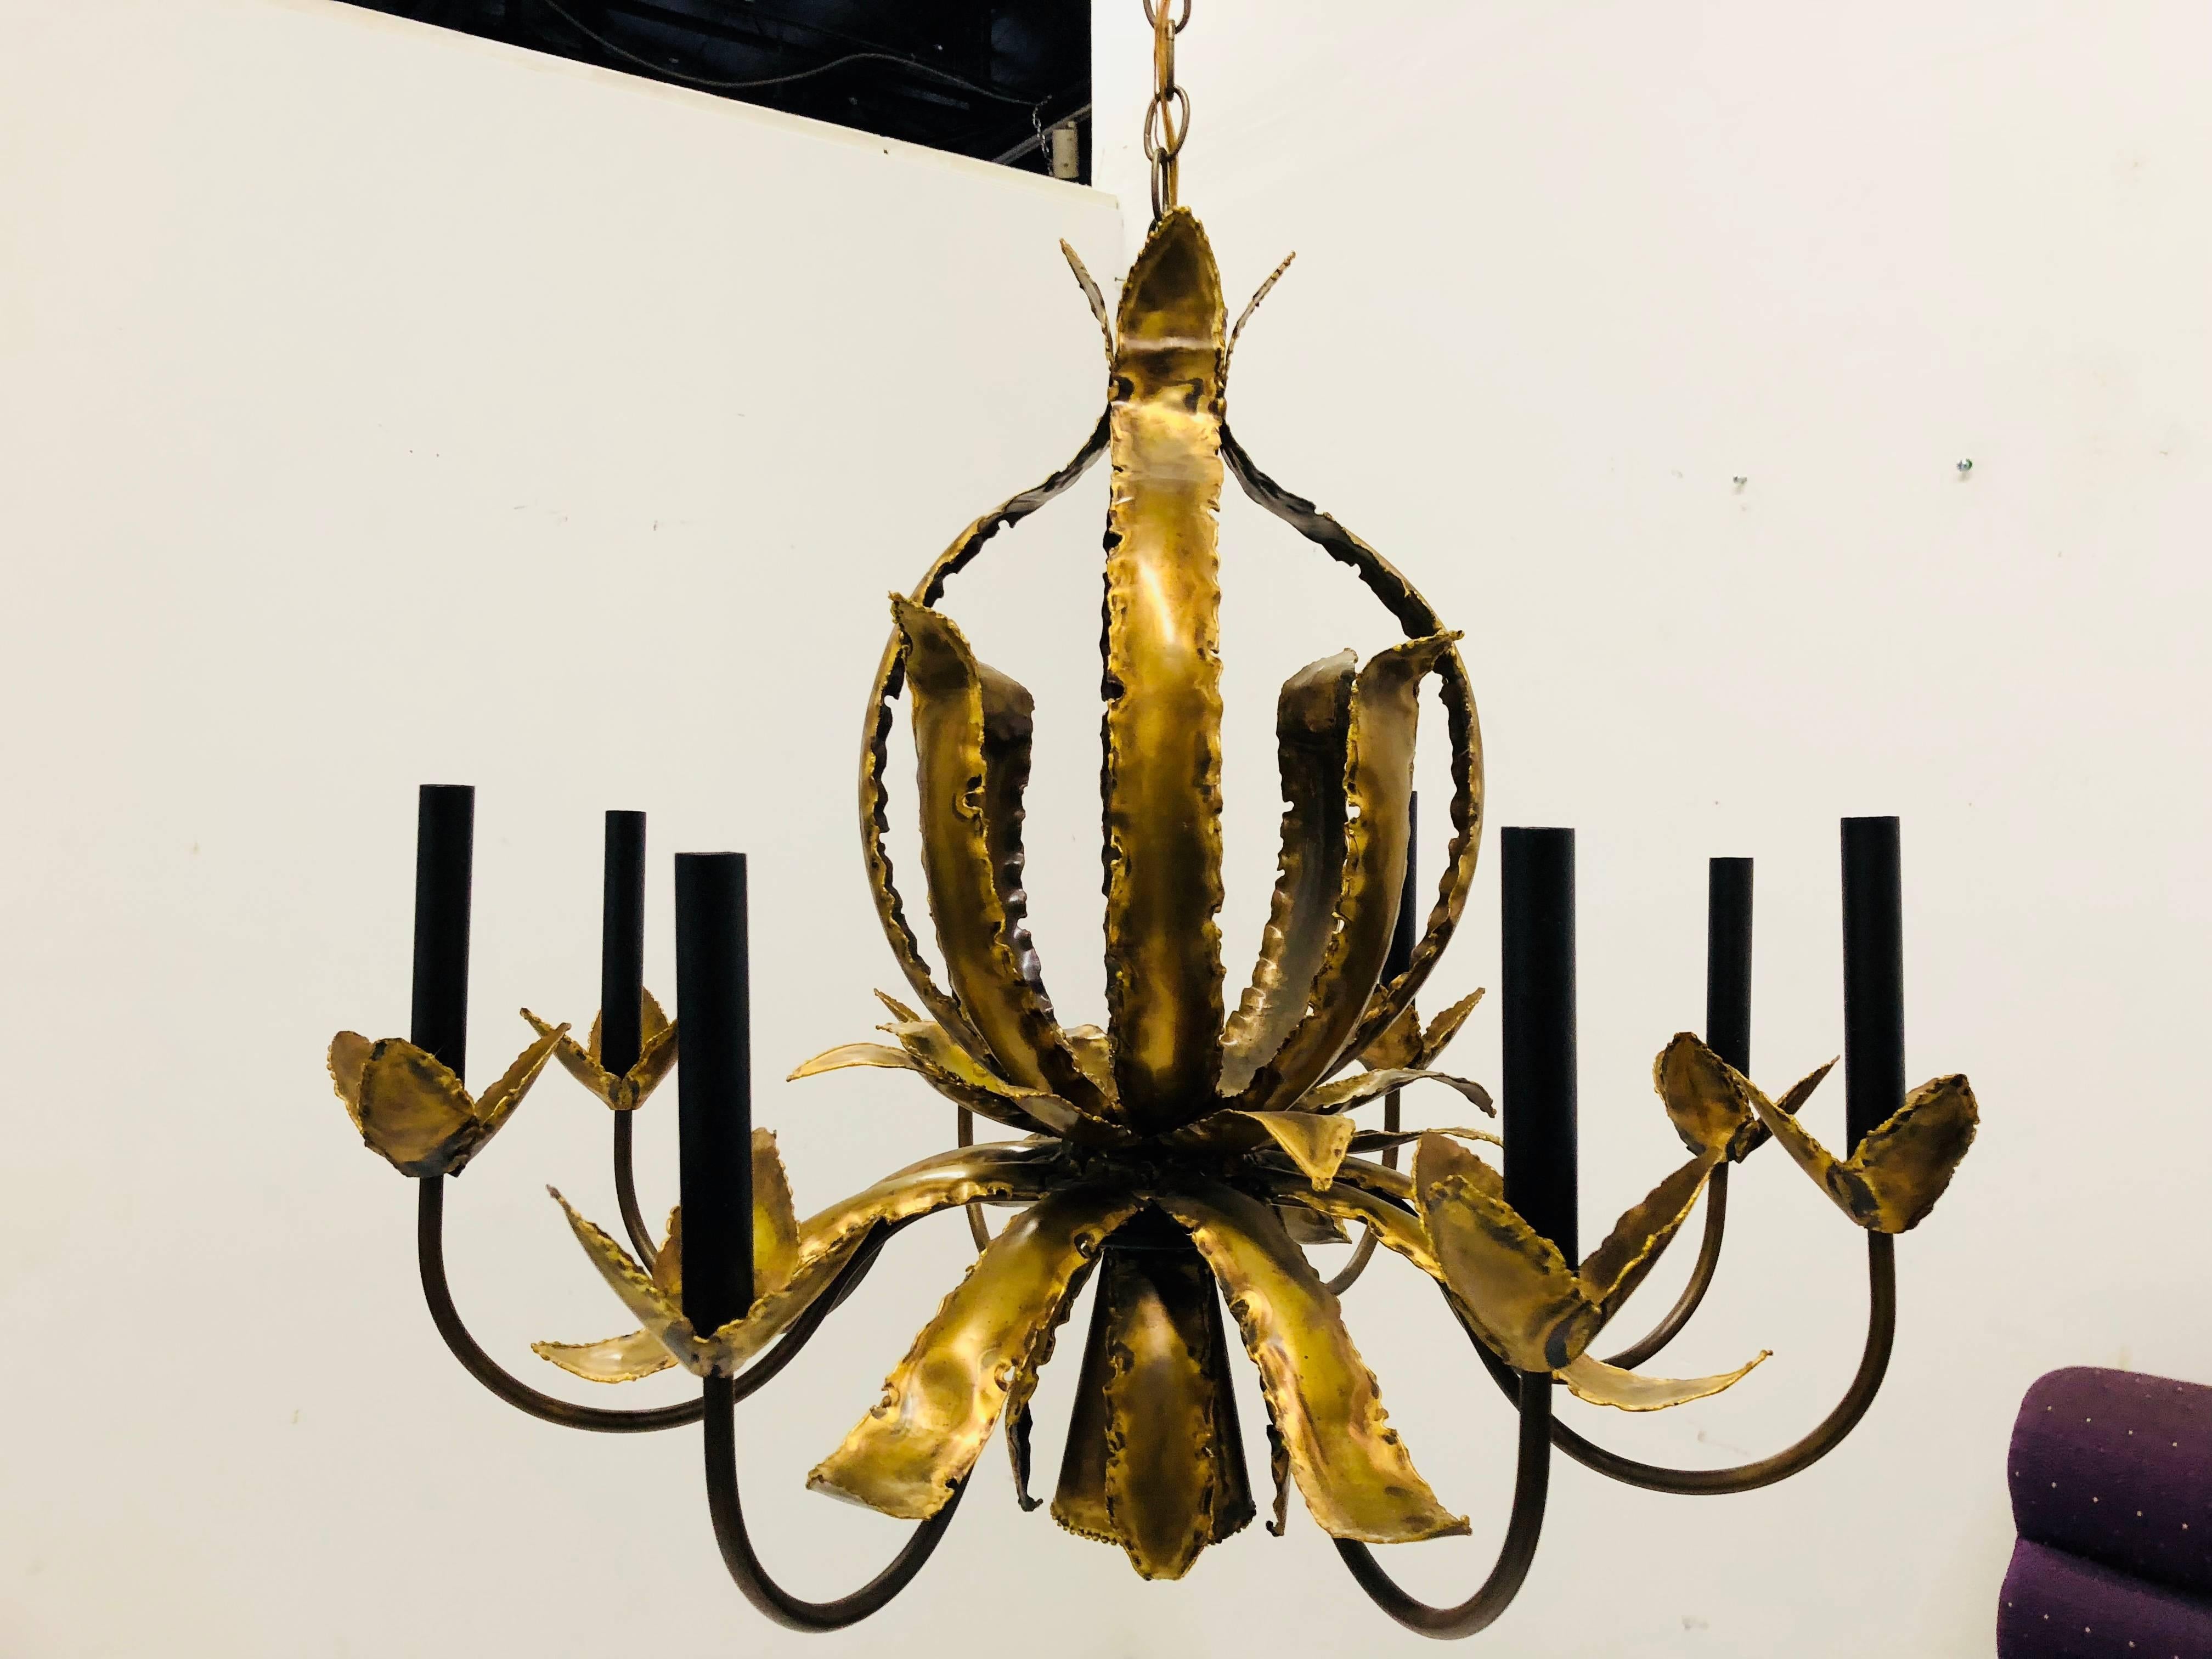 Eight-Arm Torch Cut Brutalist Chandelier with Down Light. In good vintage condition with wear due to use and age. circa 1970s

dimensions: 27